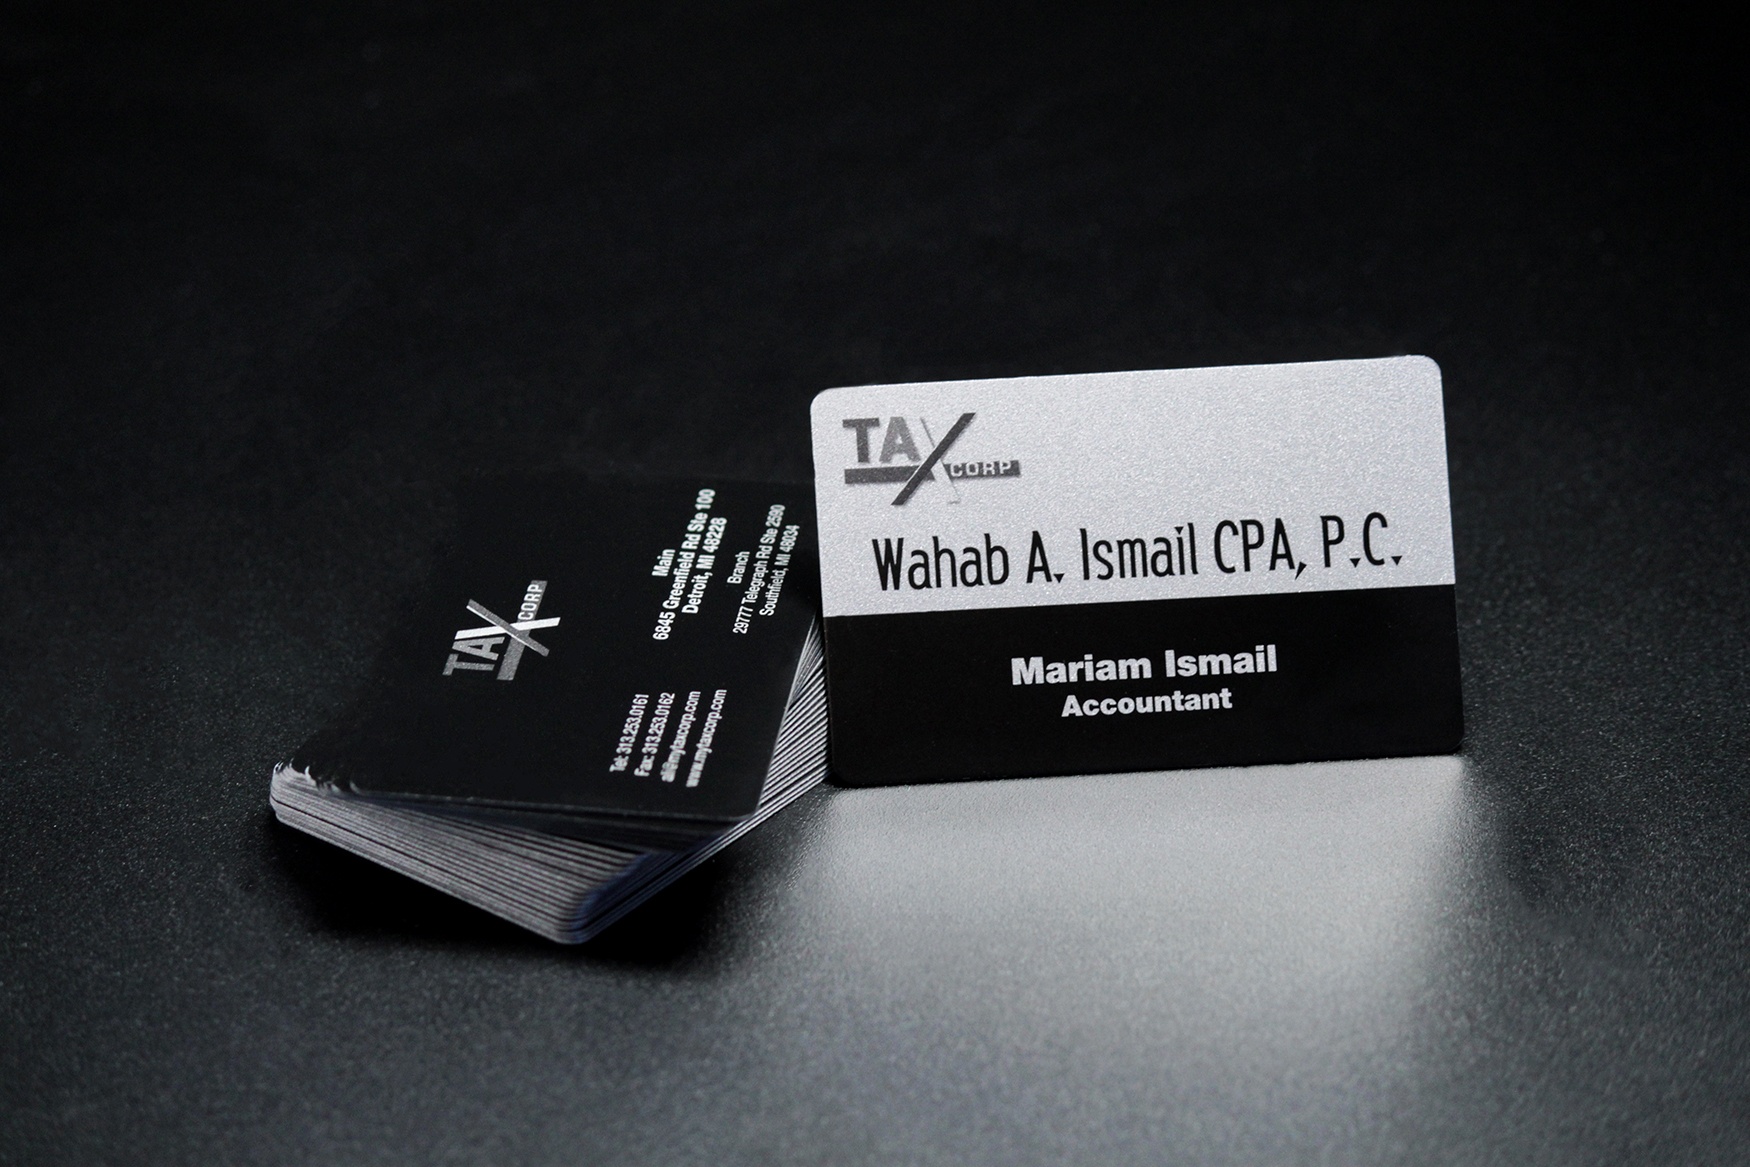 Tax Corp Accountant Business Card